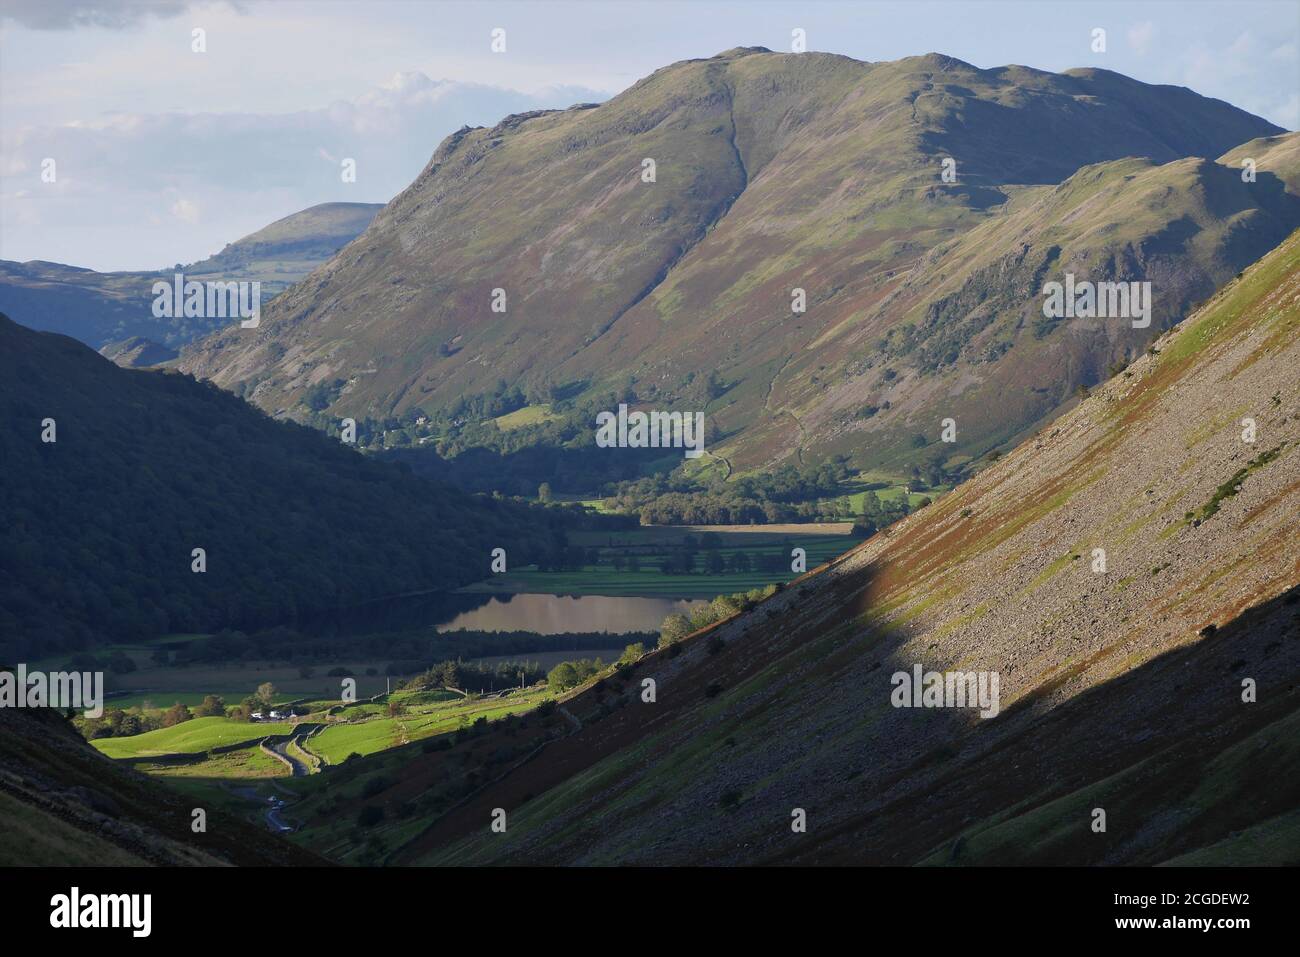 Brotherswater du col Kirkstone, parc national Lake District, Cumbria, Angleterre, Royaume-Uni Banque D'Images